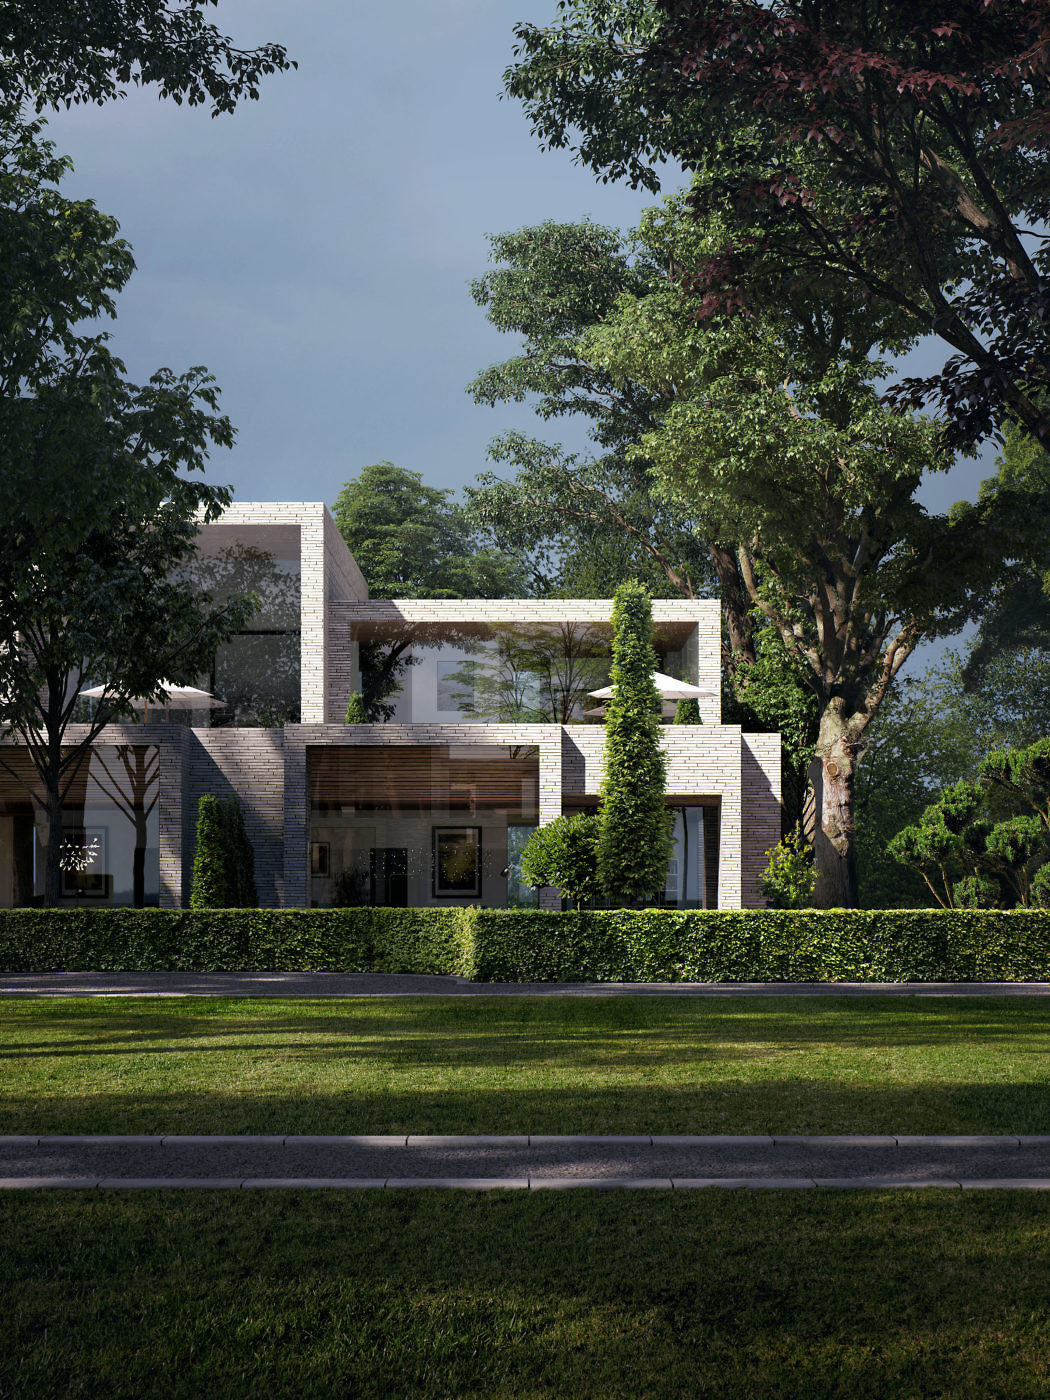 Contemporary home with clean lines, surrounded by lush greenery.